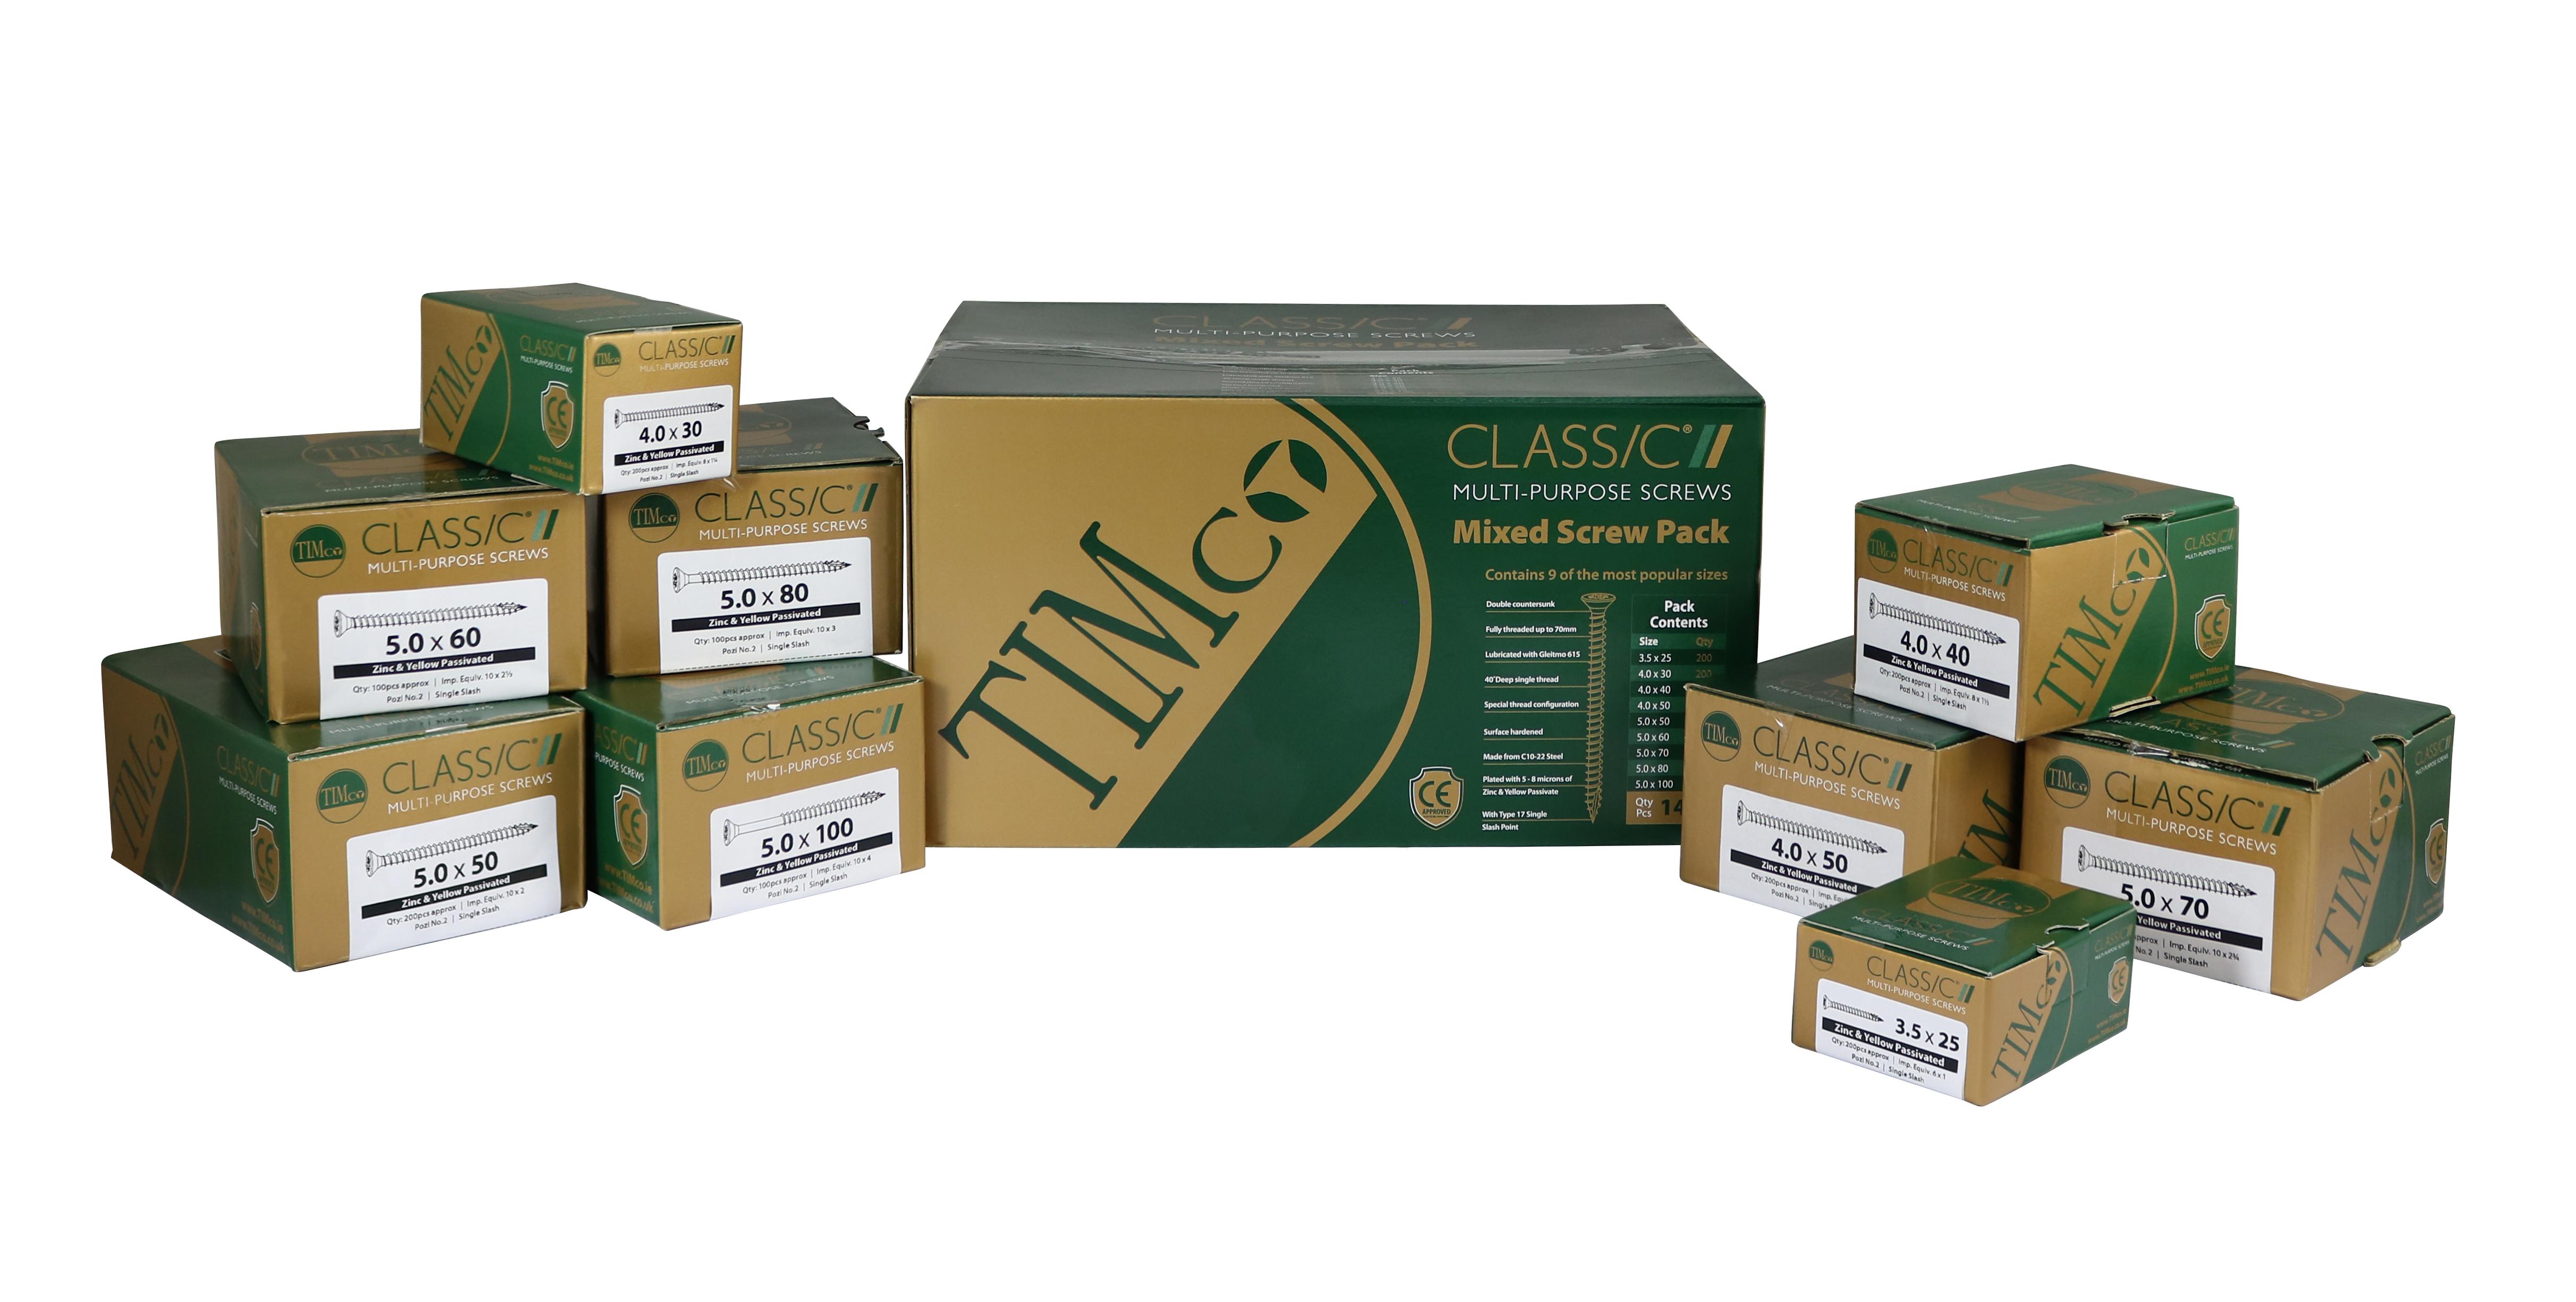 Classic Multi-Purpose Screws for Fixing Wood, Metal, MDF, Chipboard, Softwood and Hardwood #4